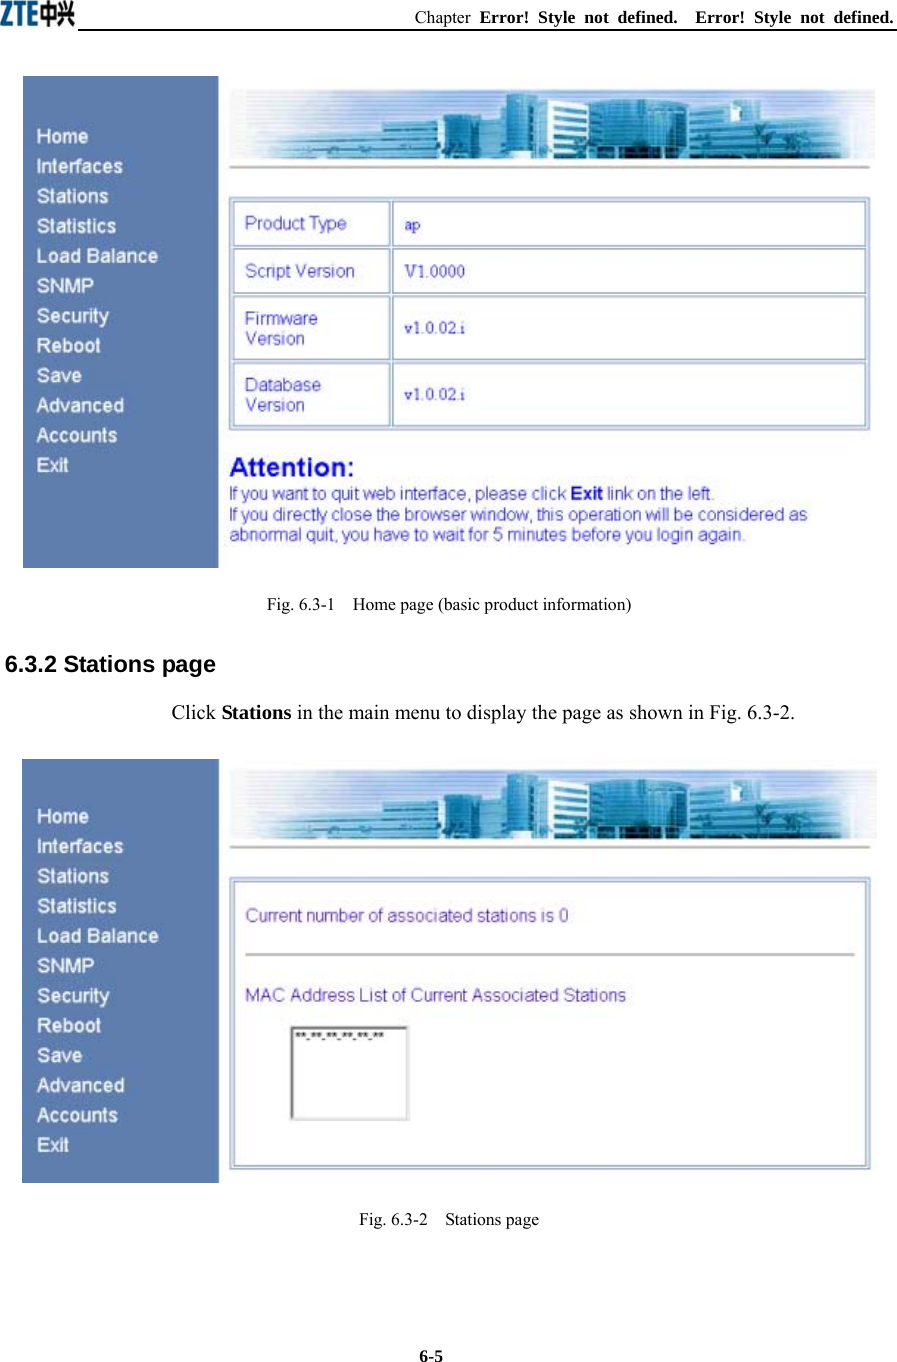 Chapter  Error! Style not defined.  Error! Style not defined.  6-5  Fig. 6.3-1    Home page (basic product information) 6.3.2 Stations page Click Stations in the main menu to display the page as shown in Fig. 6.3-2.  Fig. 6.3-2    Stations page  